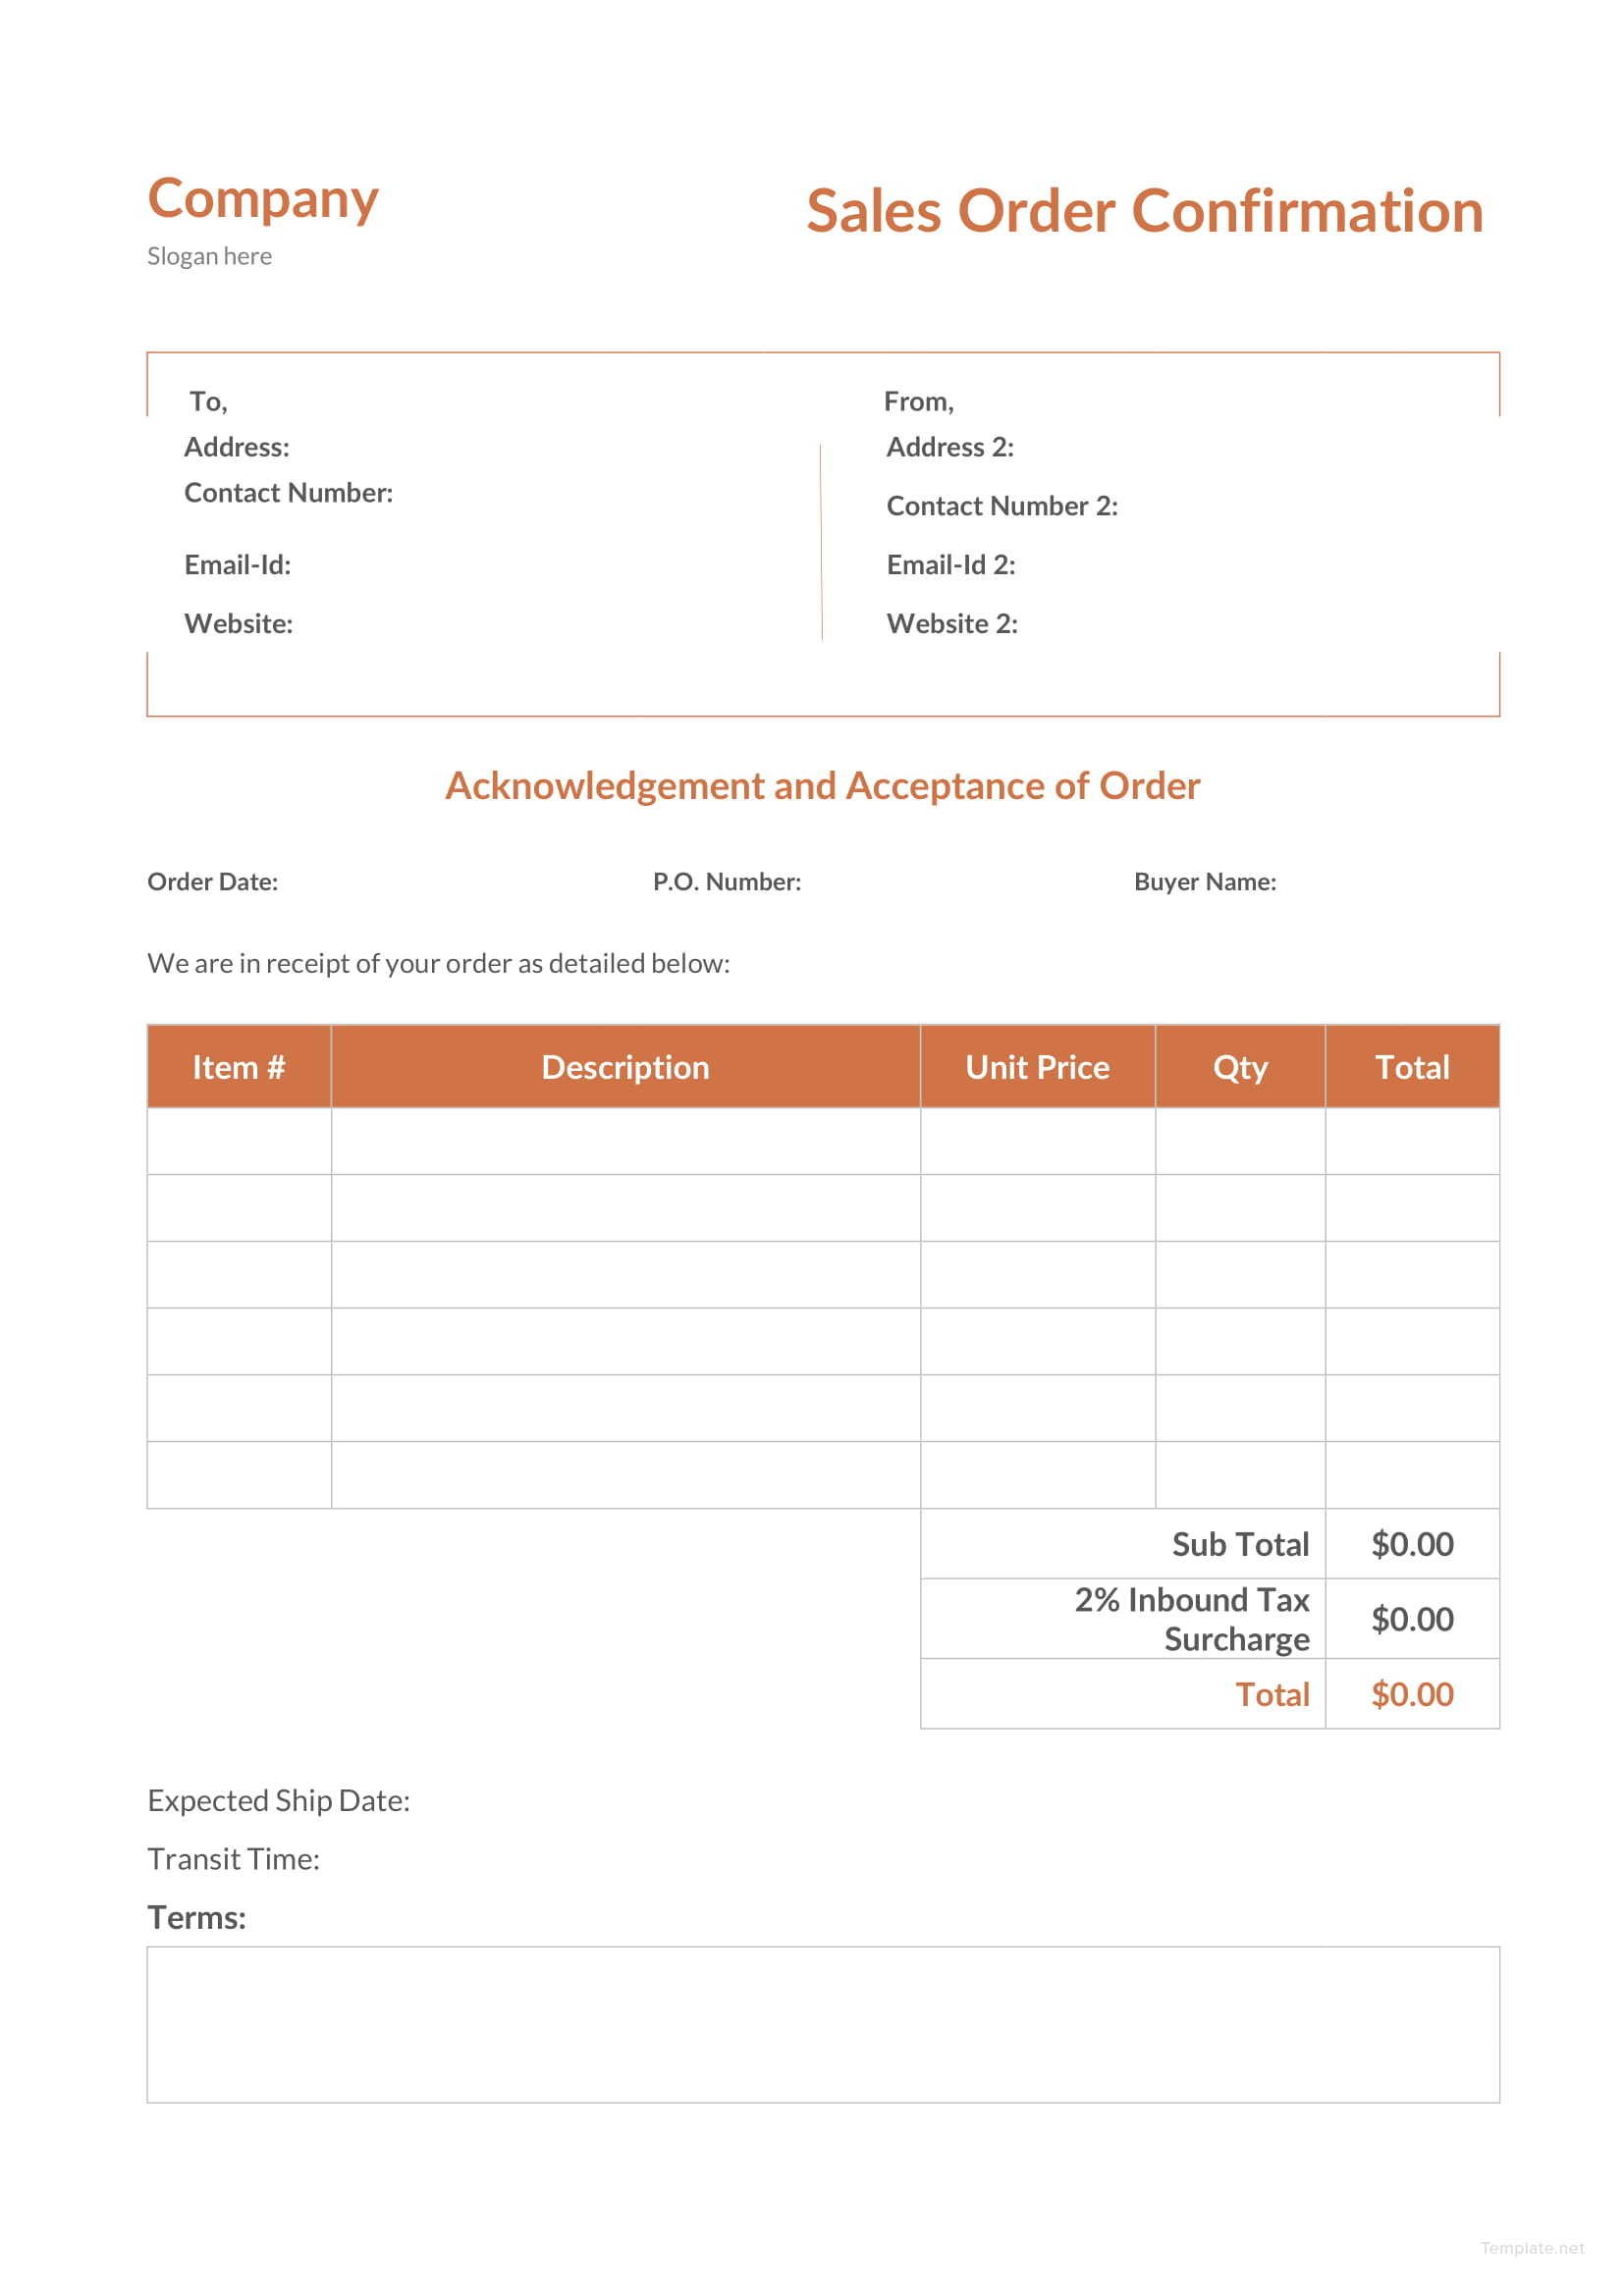 Sales Order Confirmation Template in Microsoft Word Excel Template net